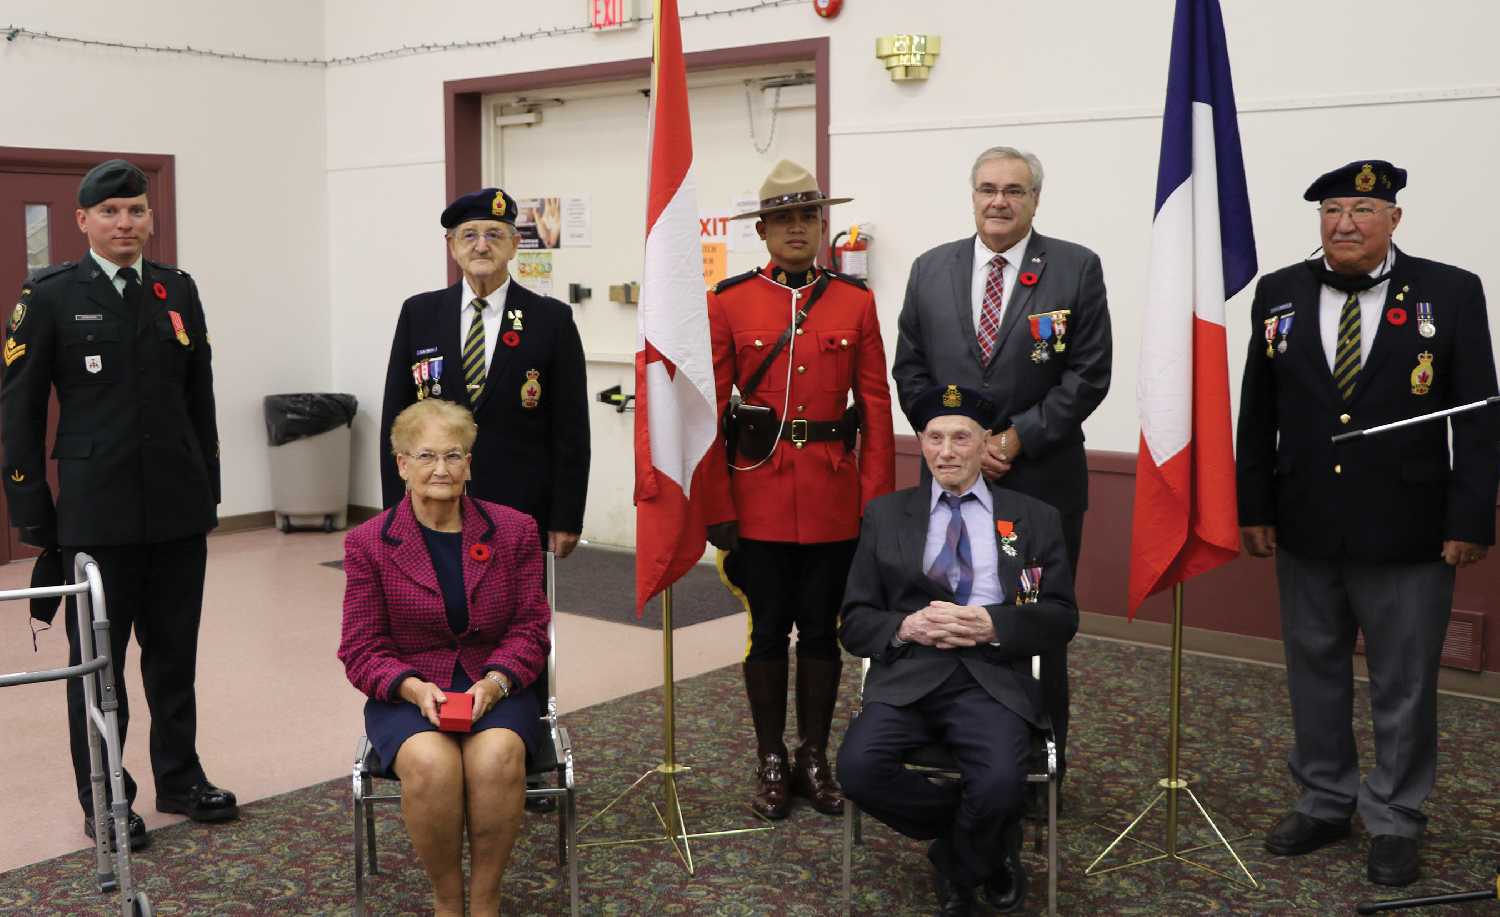 Lloyd Tibbats with representatives of the Regina Rifles, the RCMP, the Russell Legion, and French Consul Bruno Burnichon.